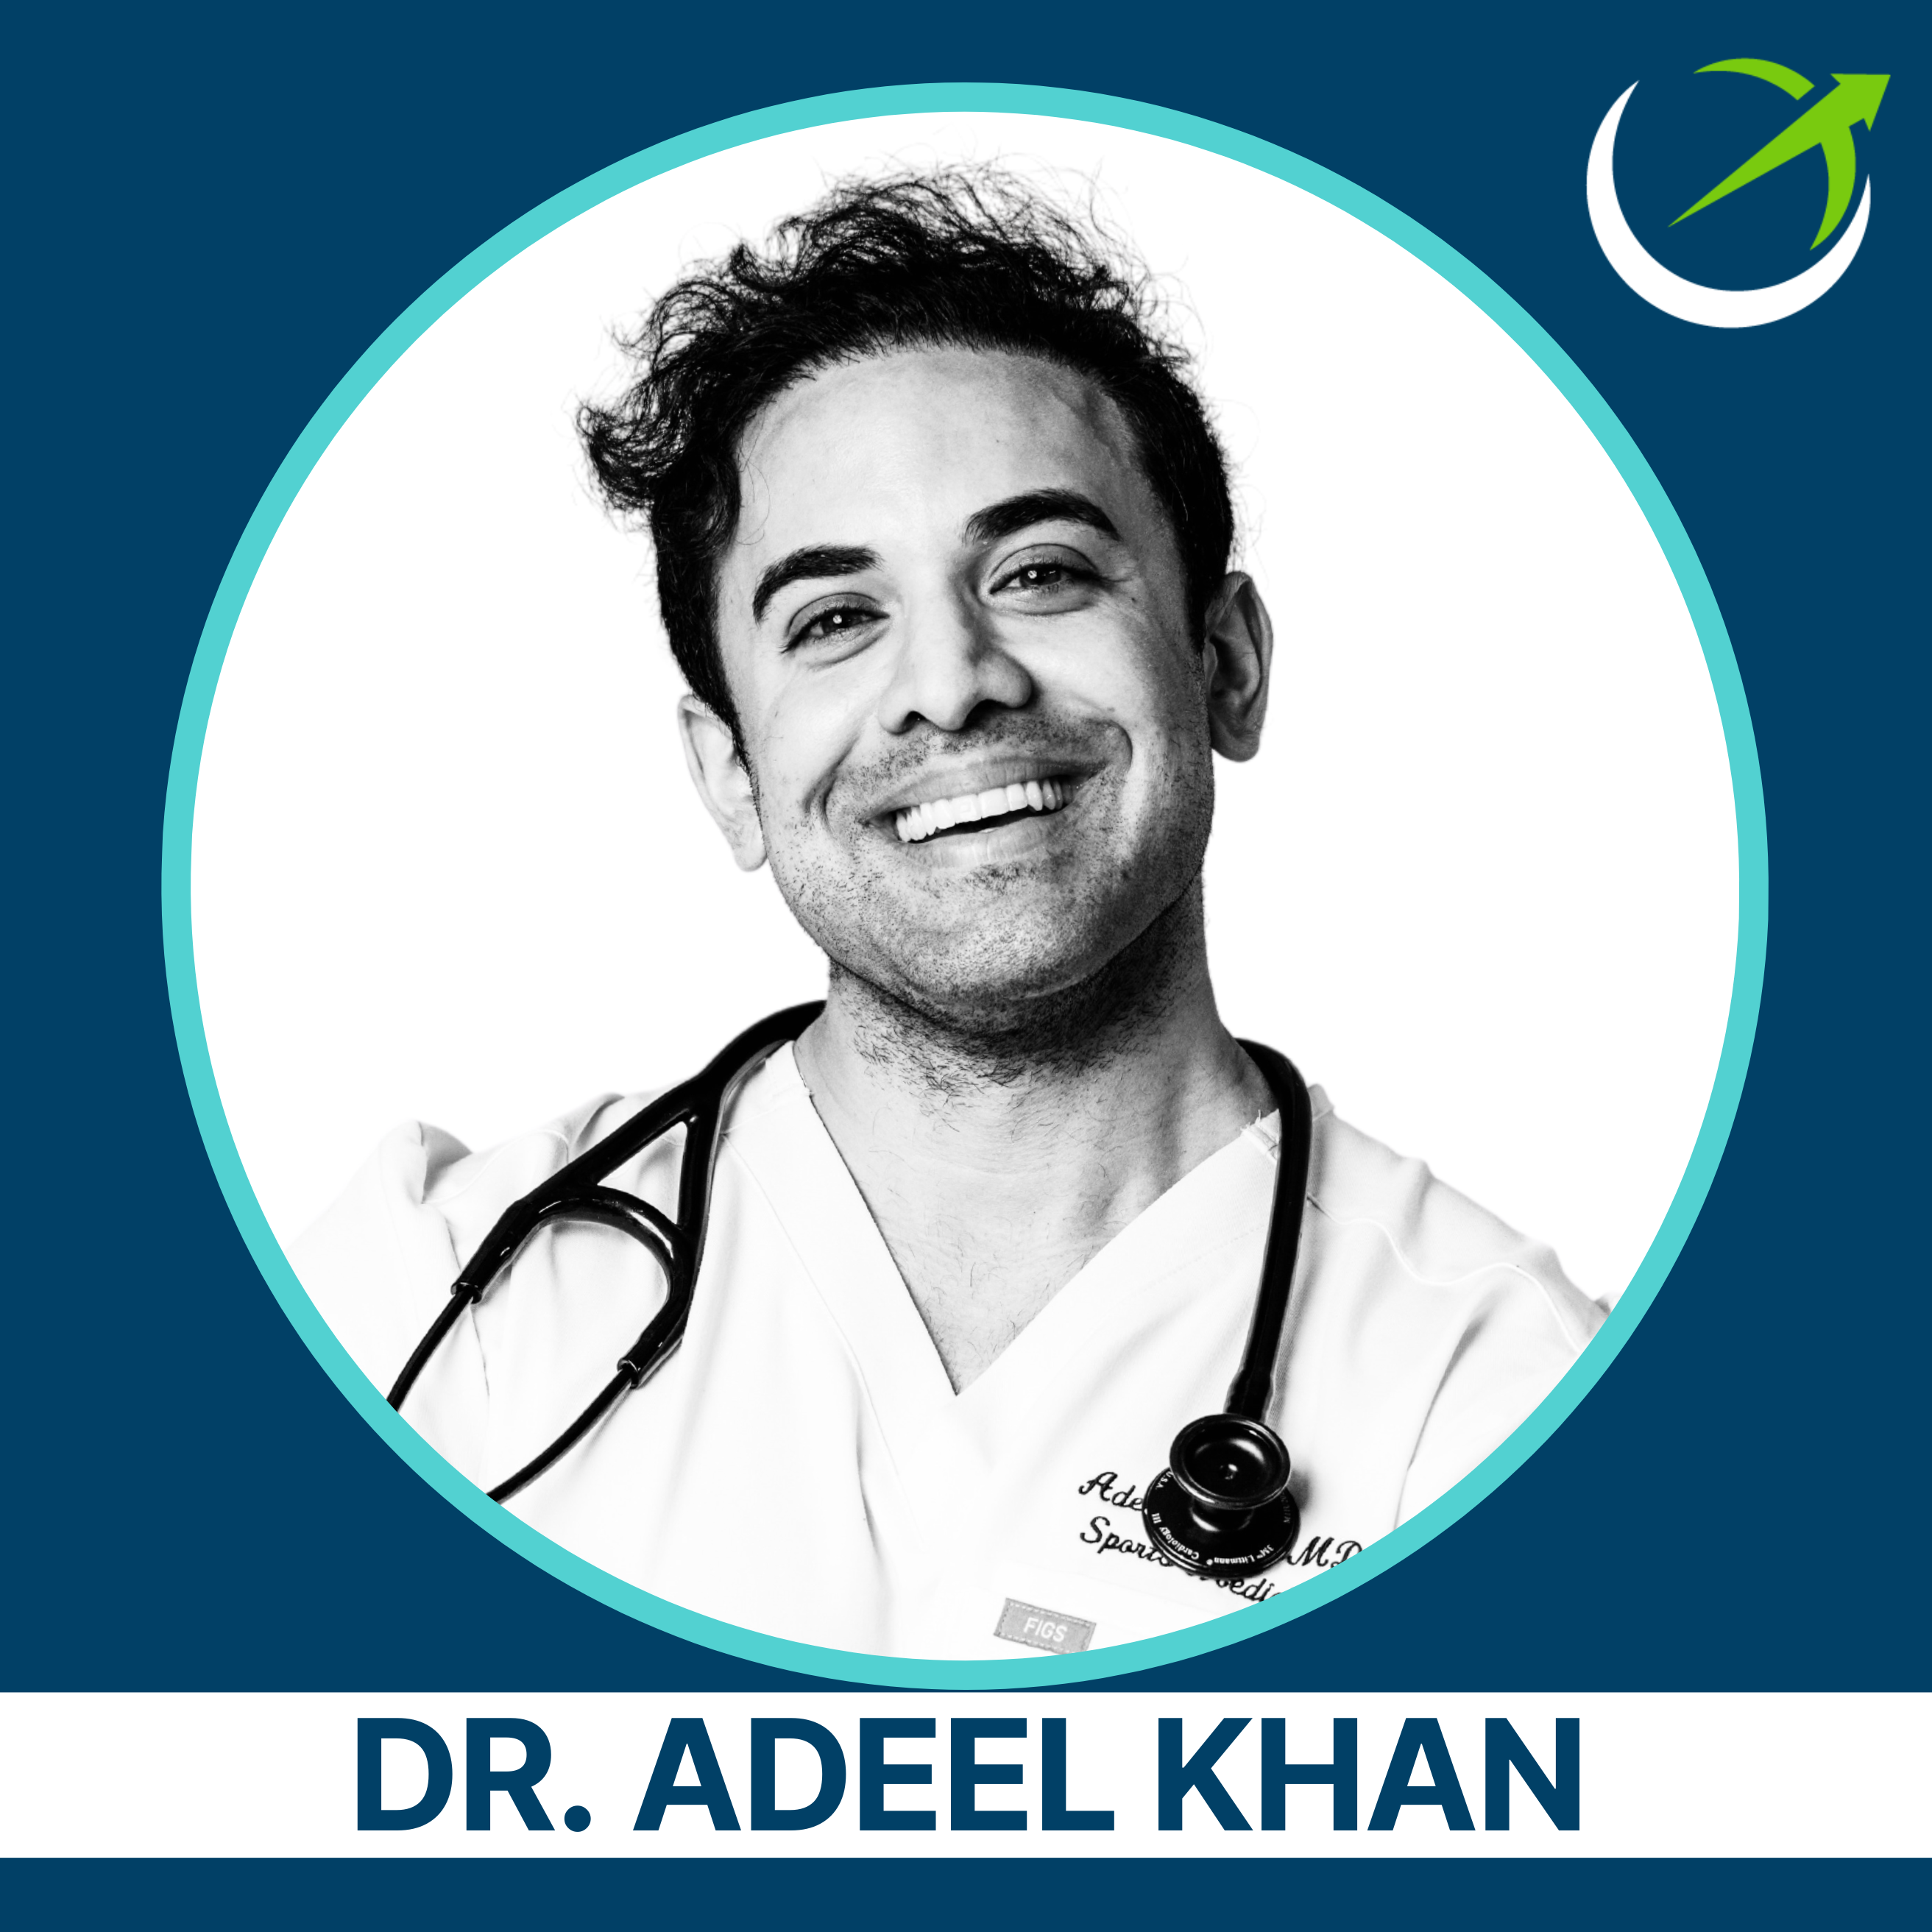 Follistatin & Klotho Gene Therapy, Stem Cells In Mexico, NK Killer Cells, Advanced Age Reversal Tactics & More With Adeel Khan